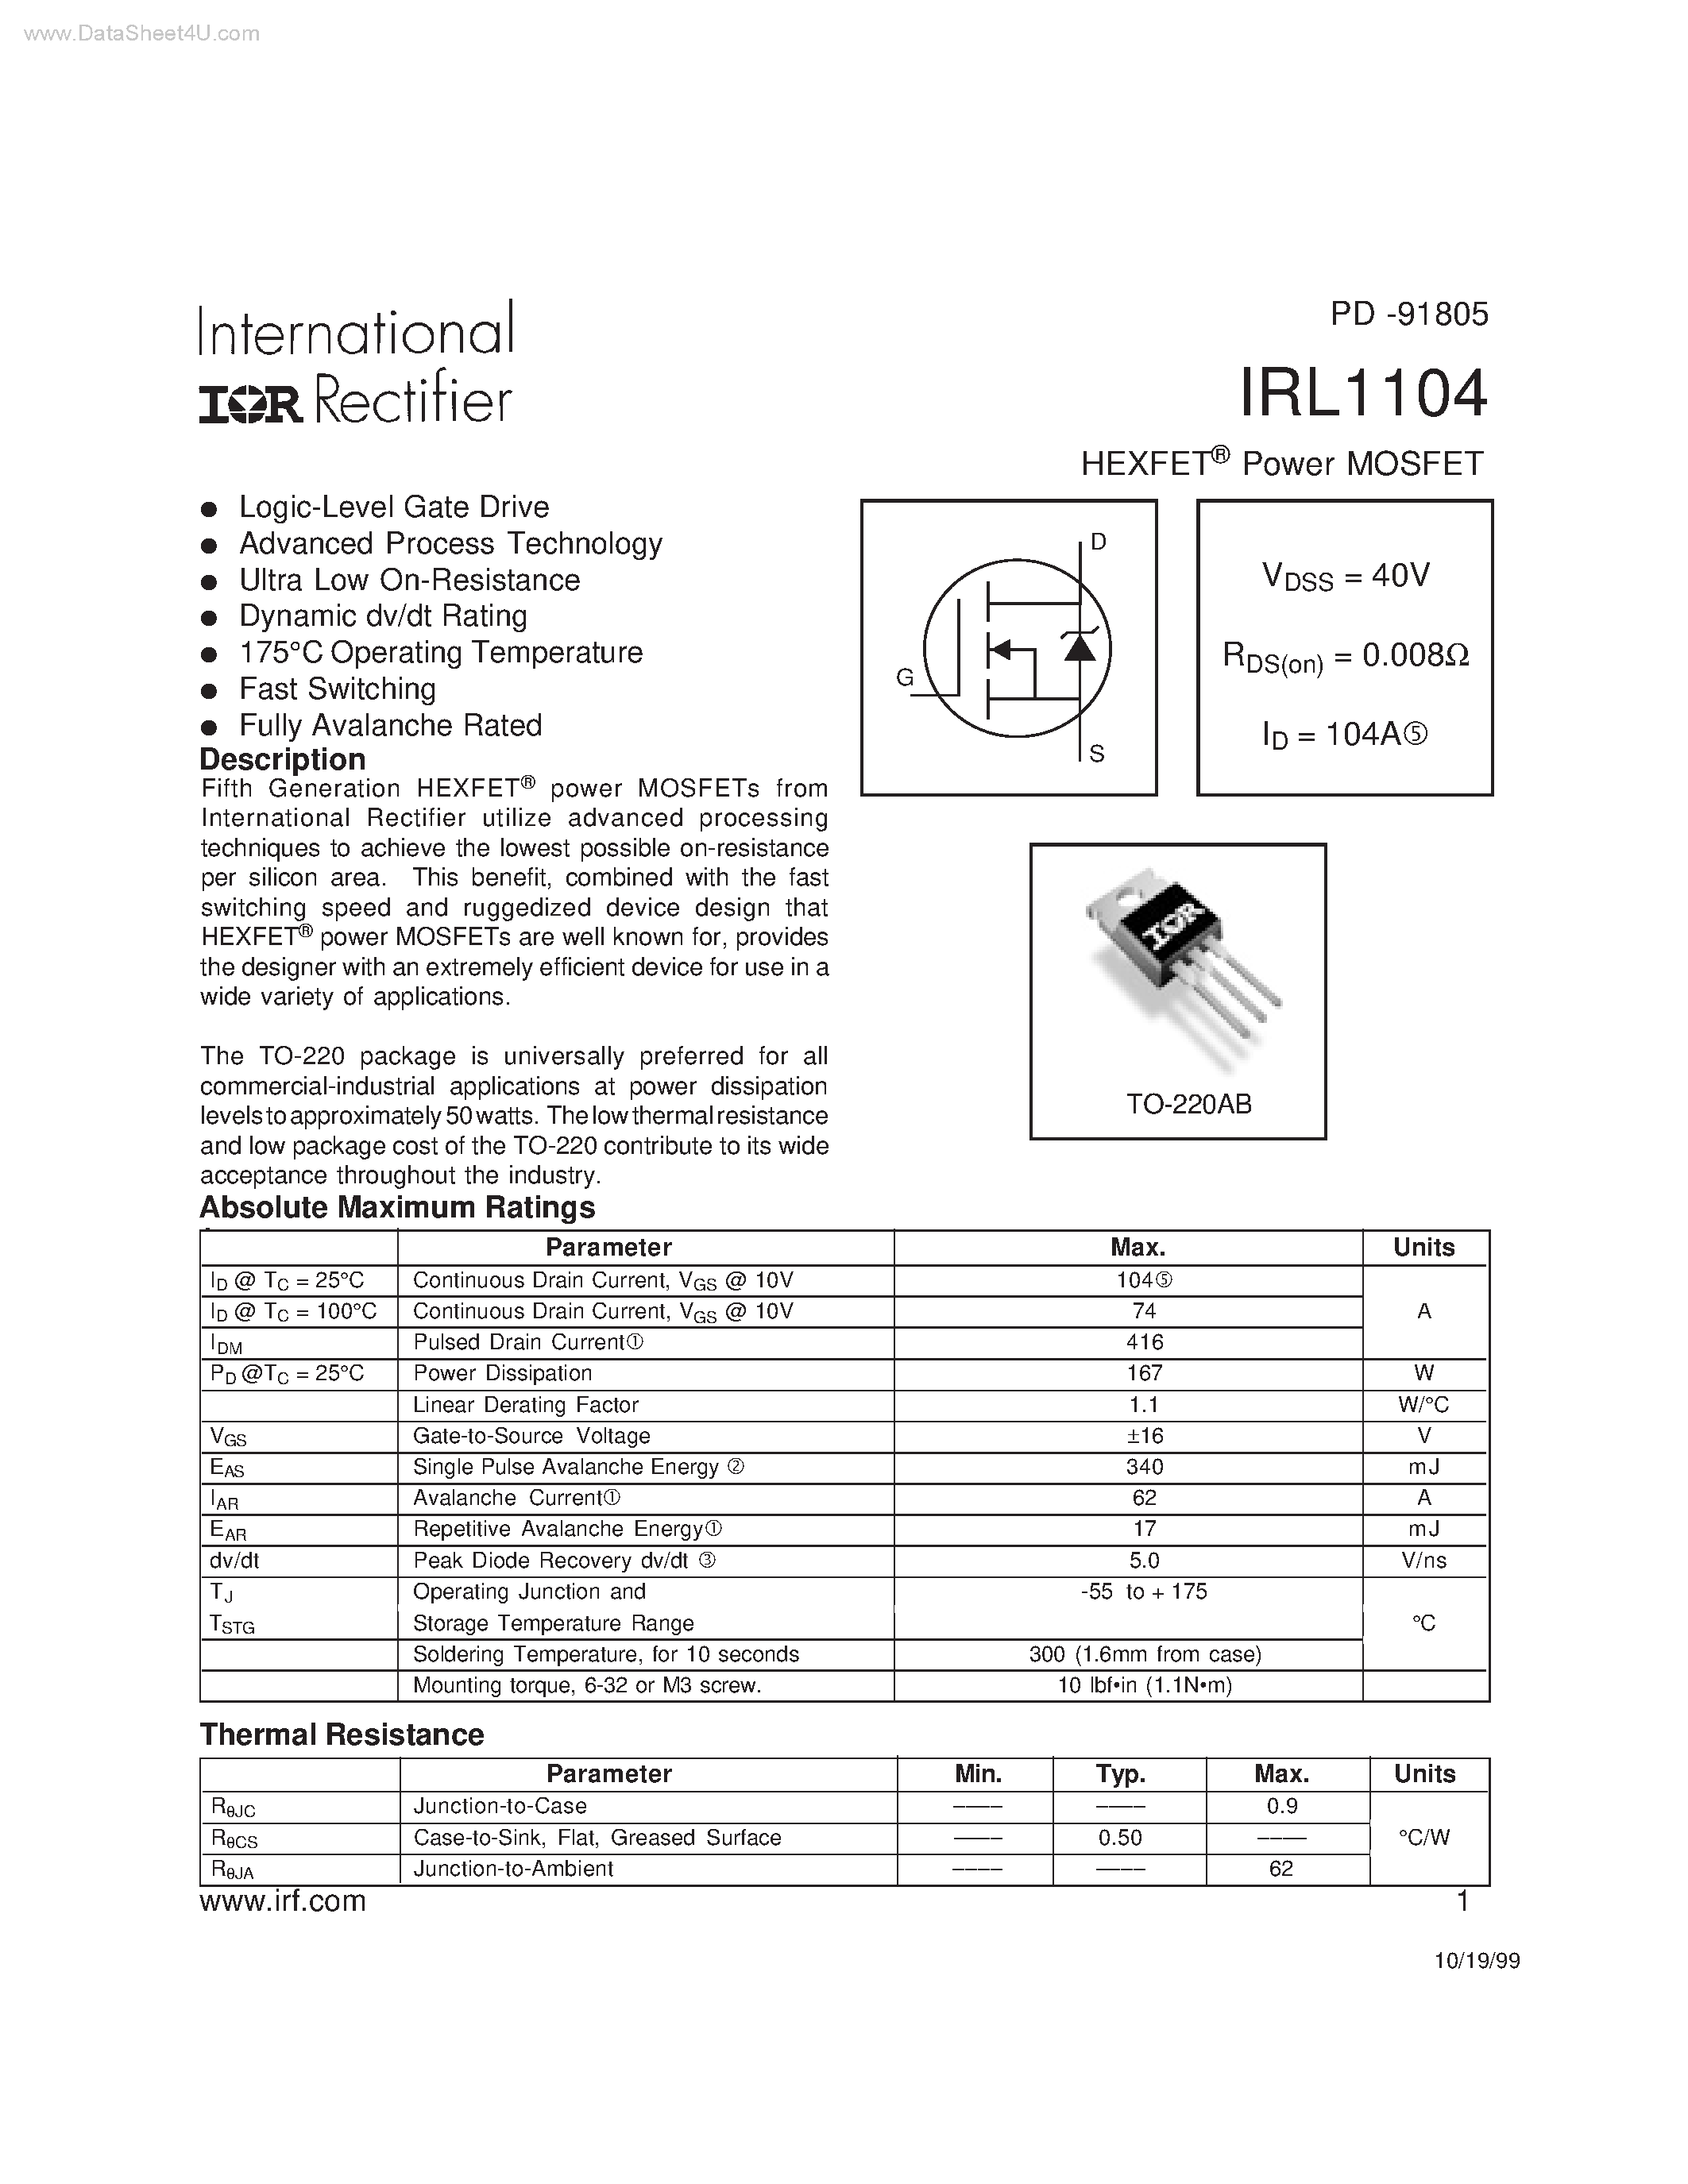 Даташит IRL1104 - HEXFET Power MOSFET страница 1